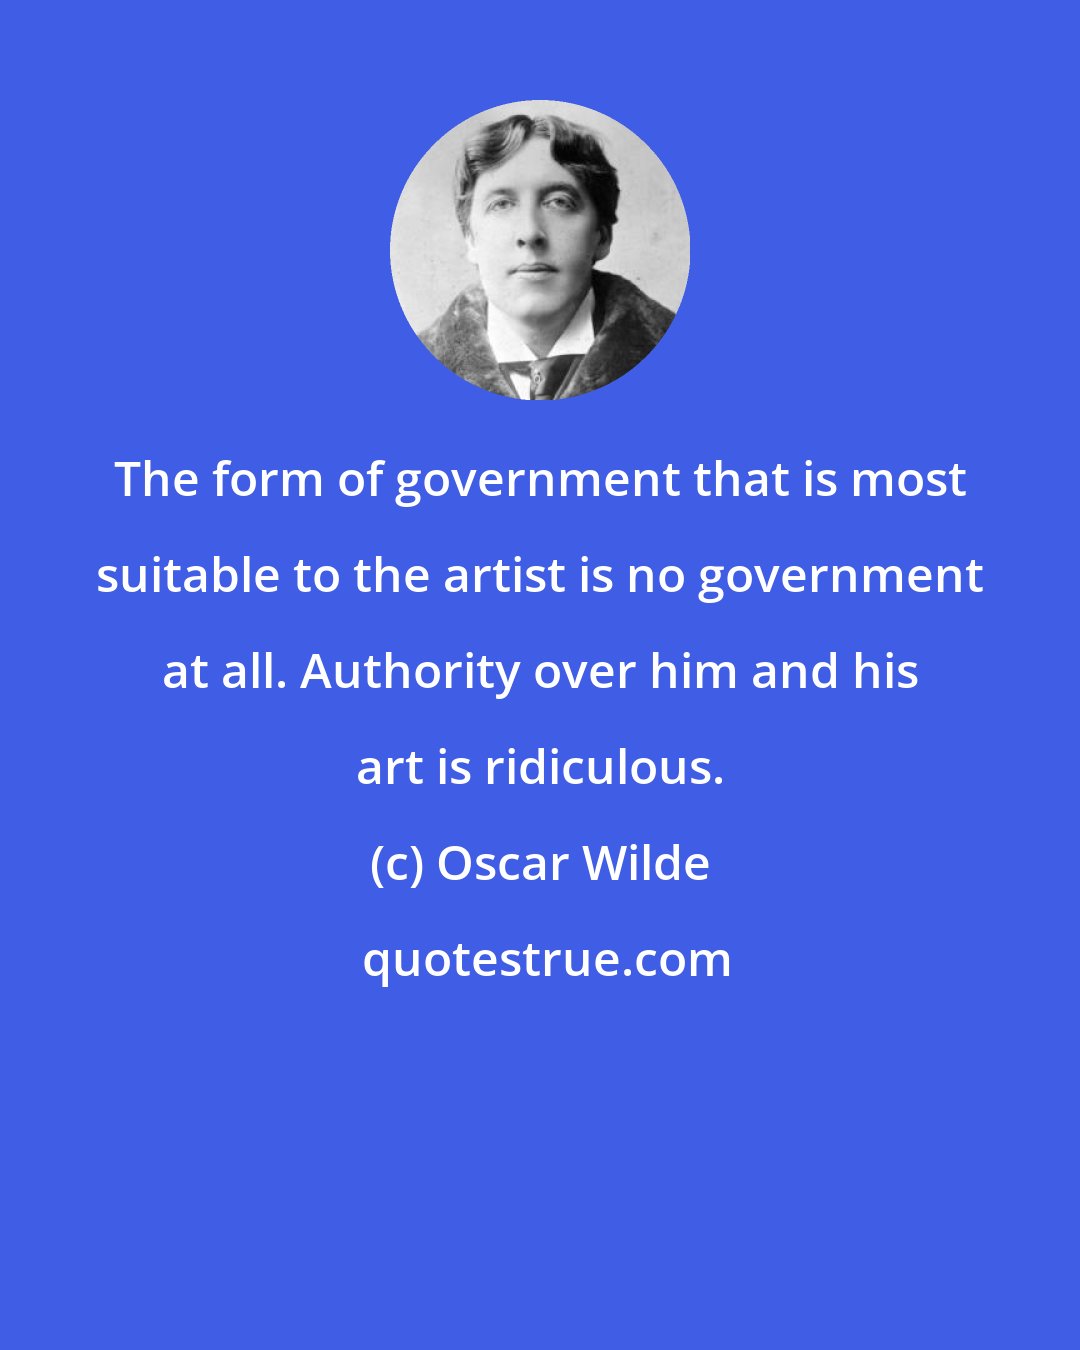 Oscar Wilde: The form of government that is most suitable to the artist is no government at all. Authority over him and his art is ridiculous.